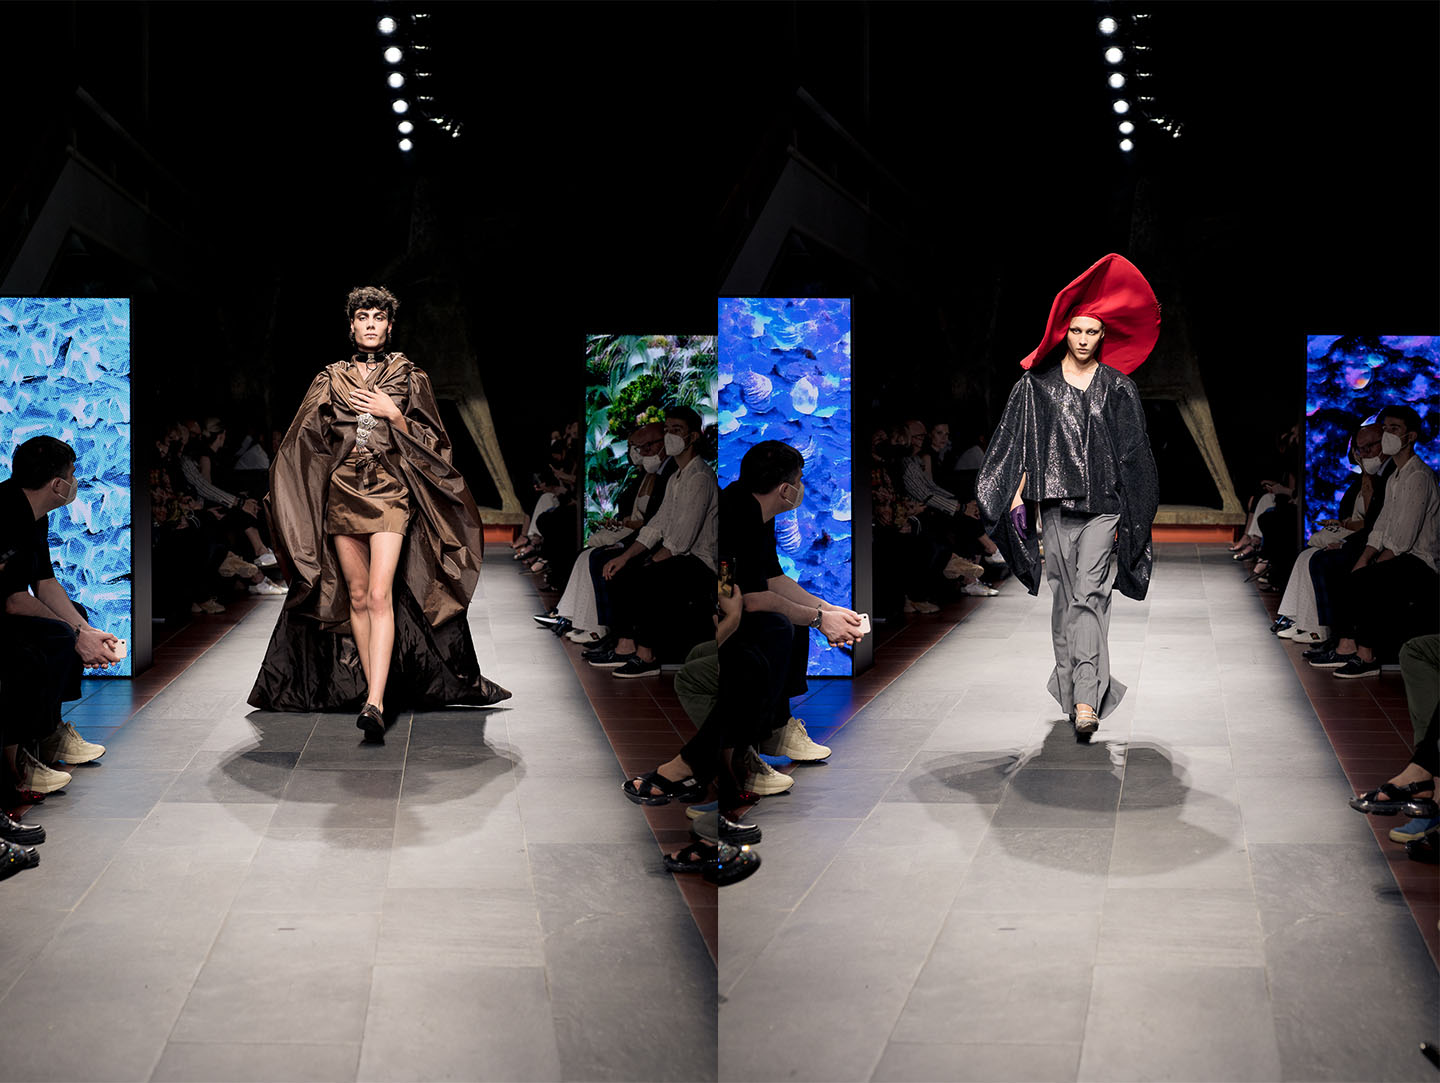 From left to right, creations by Laetitia Wen and Lucrezia Veltroni